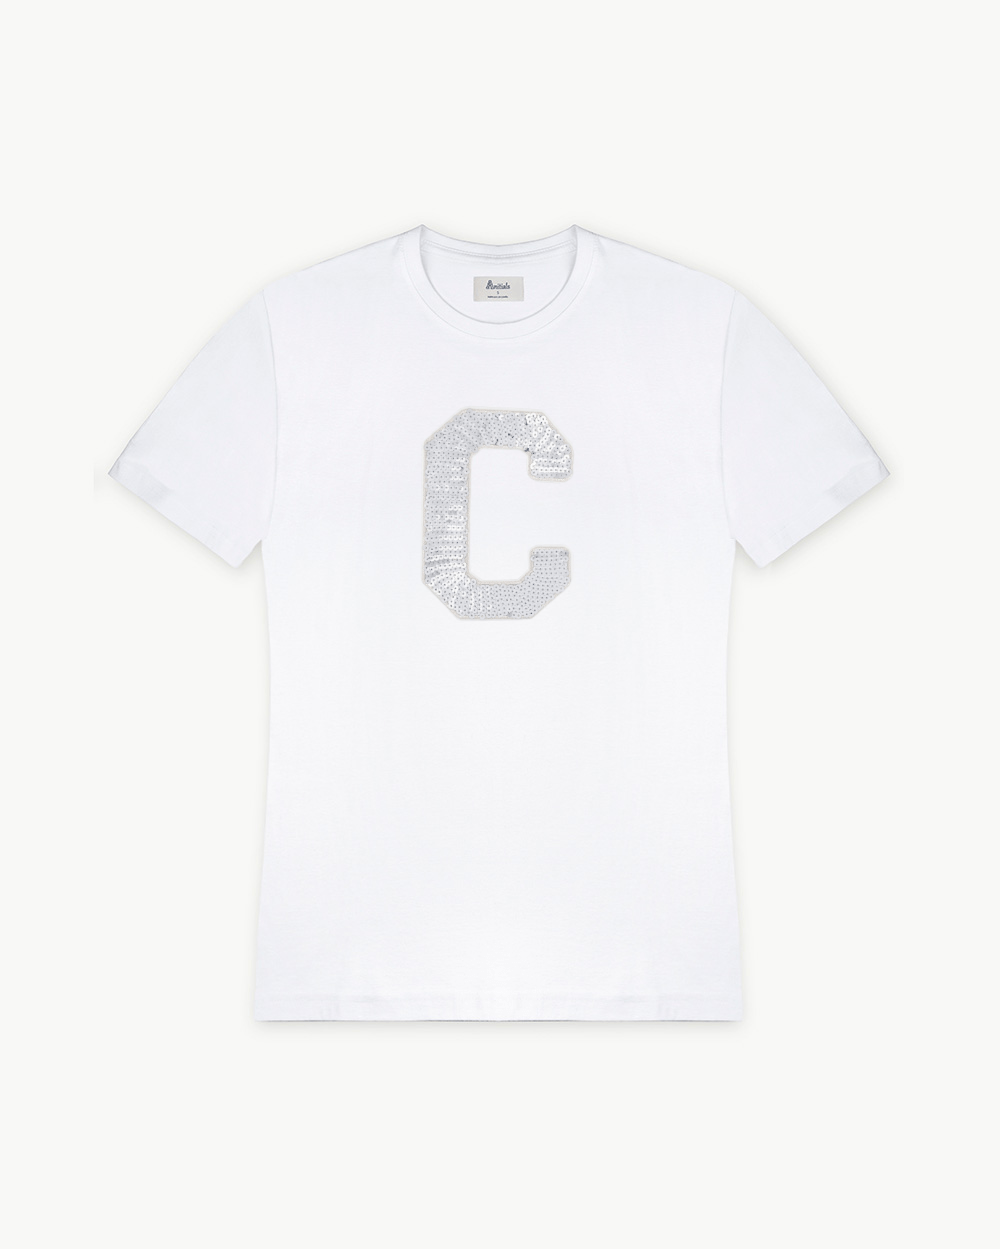 WHITE T-SHIRT | SILVER SEQUINS INITIAL